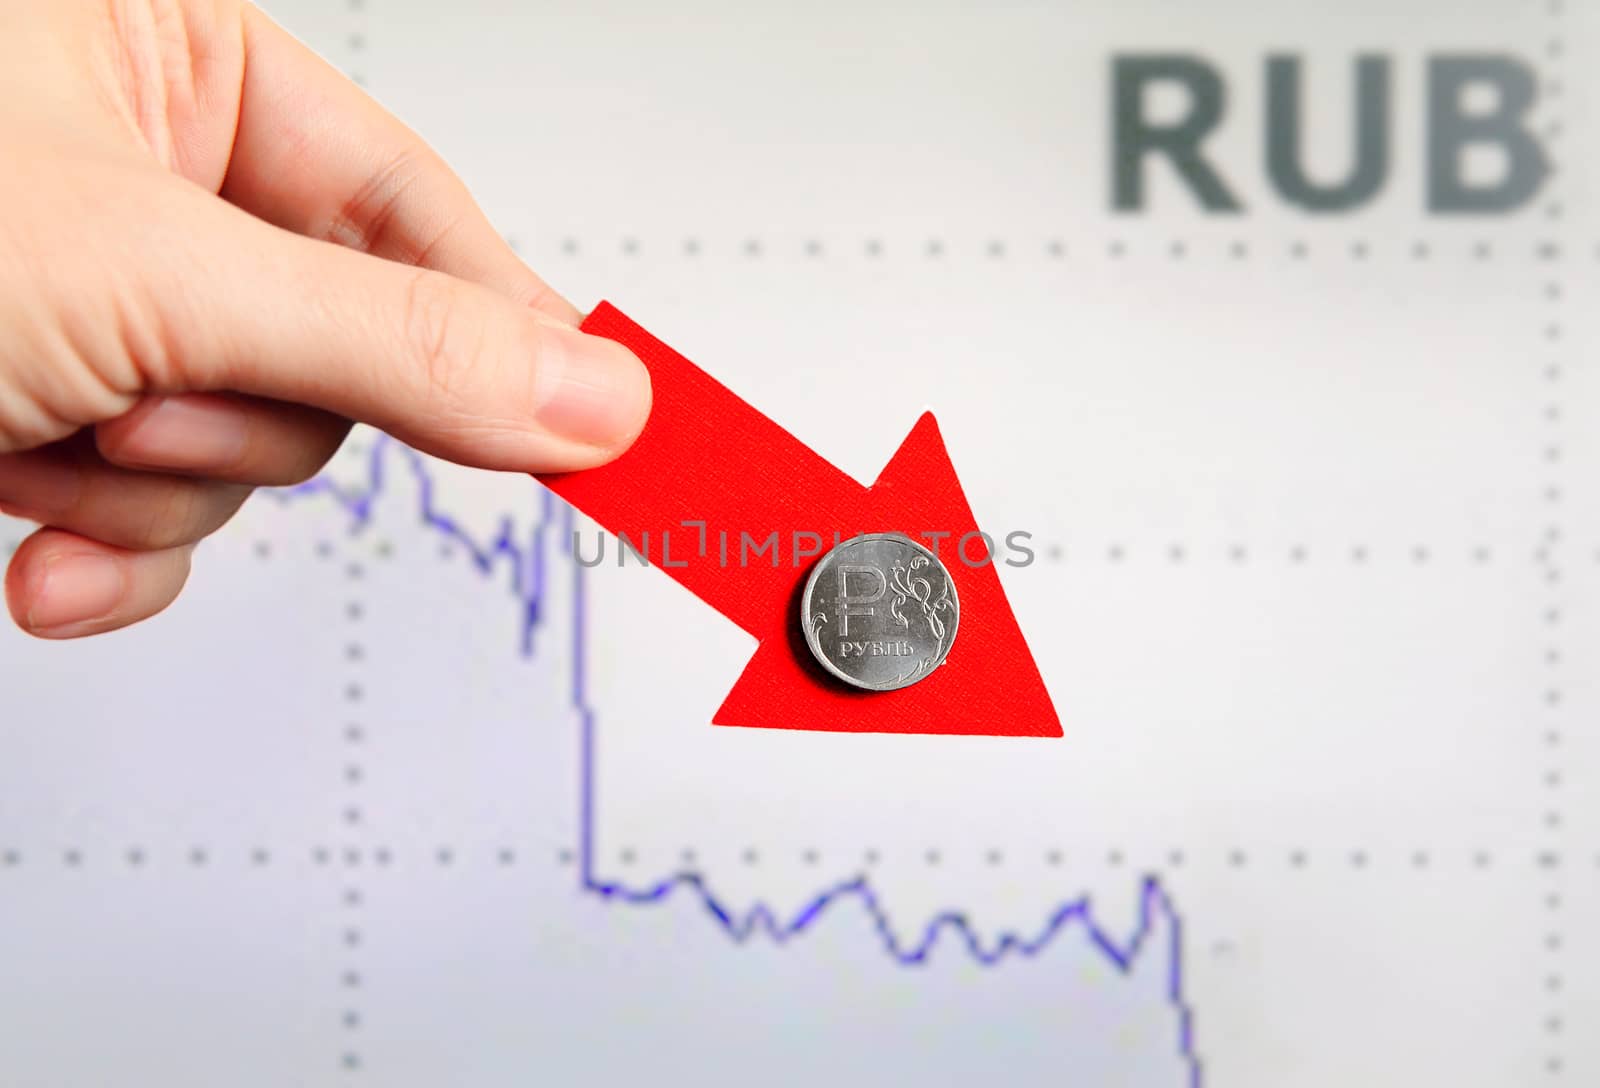 Russian Ruble Down by sabphoto